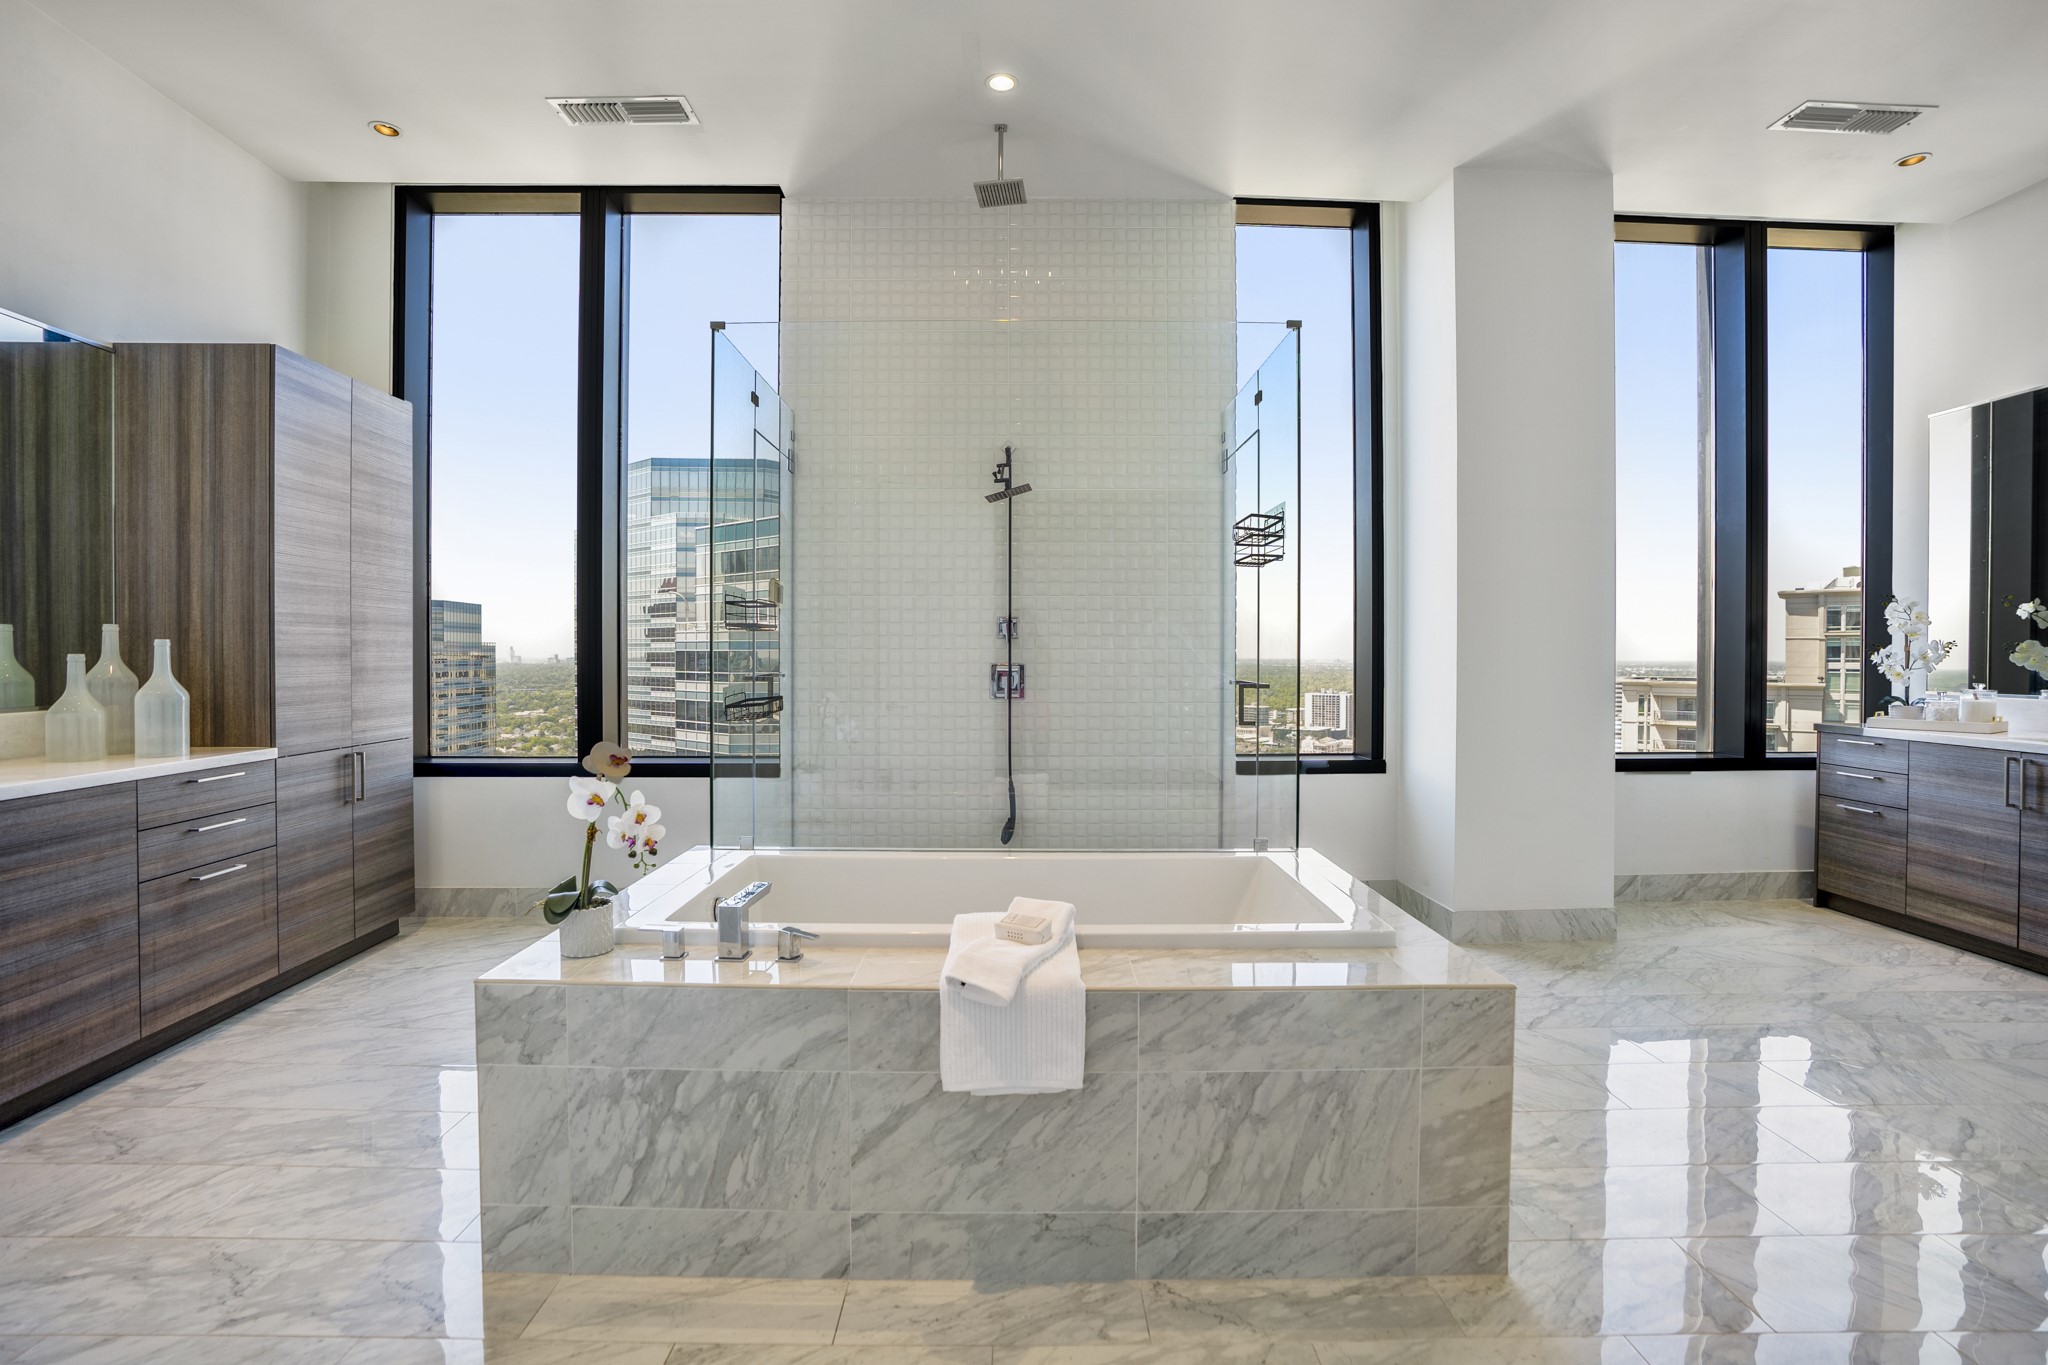 This primary bathroom features
a walk-in shower with tile
surround, separate tub for
soaking after a long day, light
countertops, tile floors, and
sleek modern finishes!